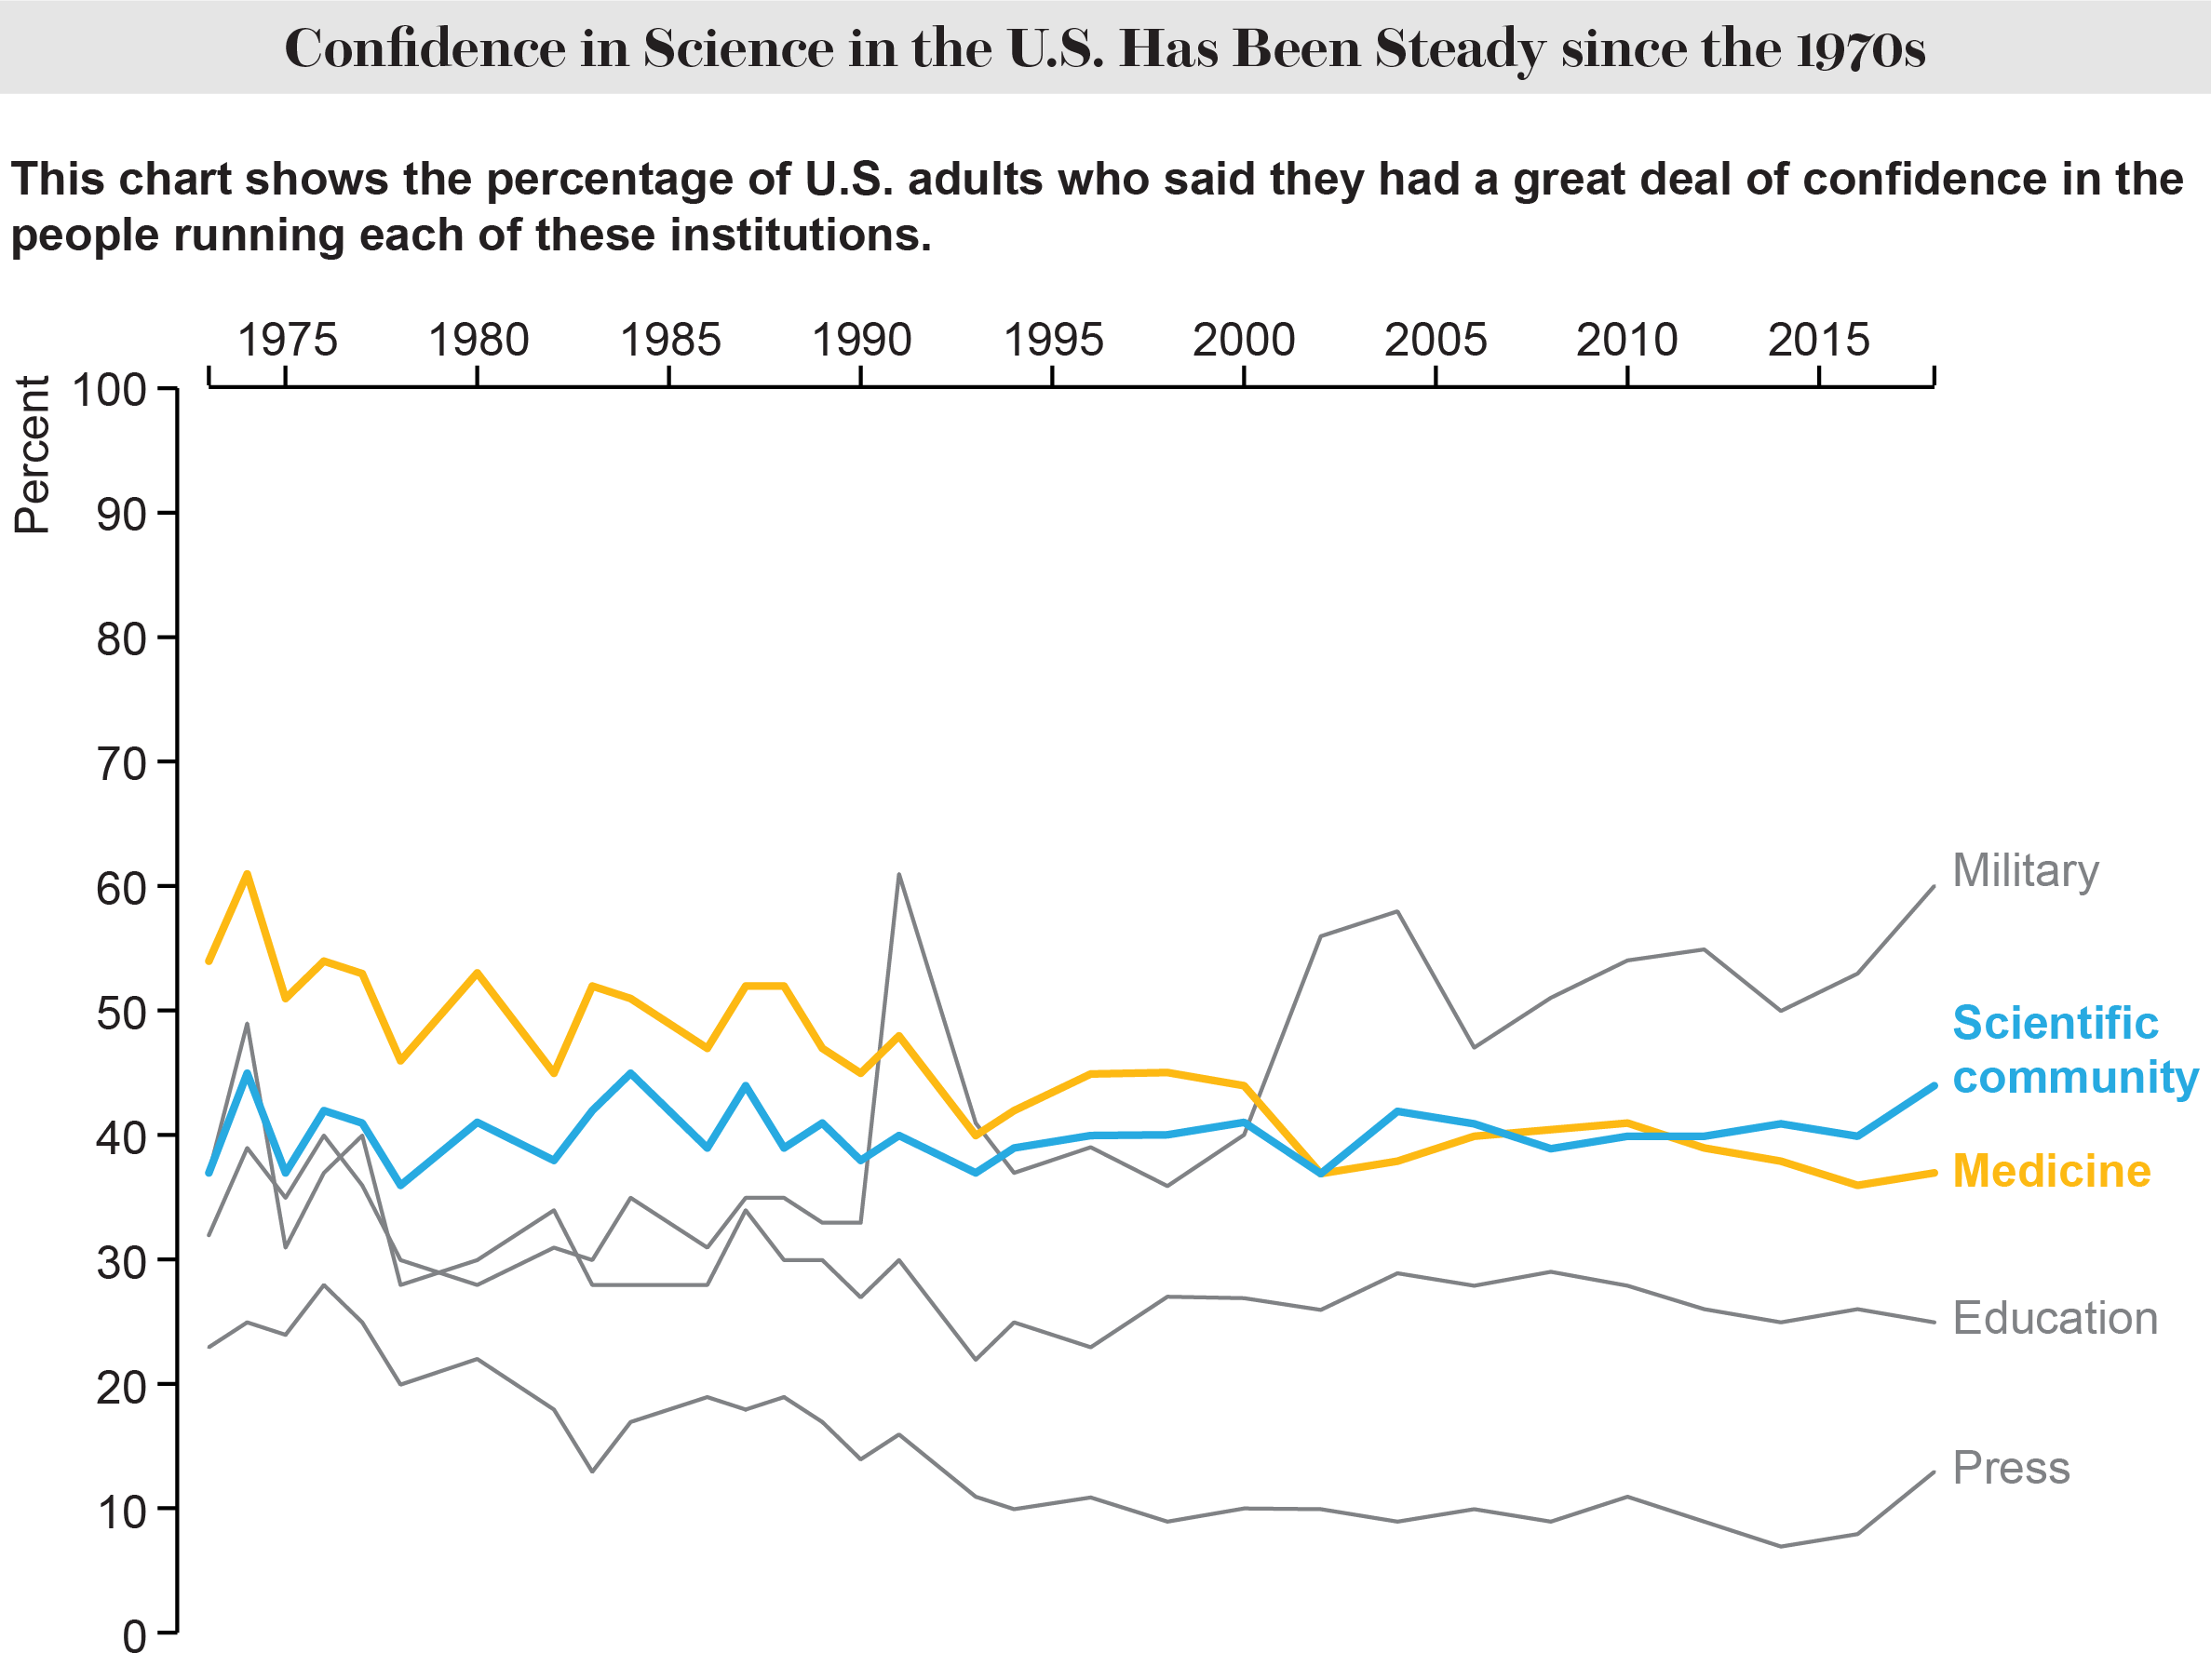 Public confidence in science, medicine, military, education and press 1973 to 2018